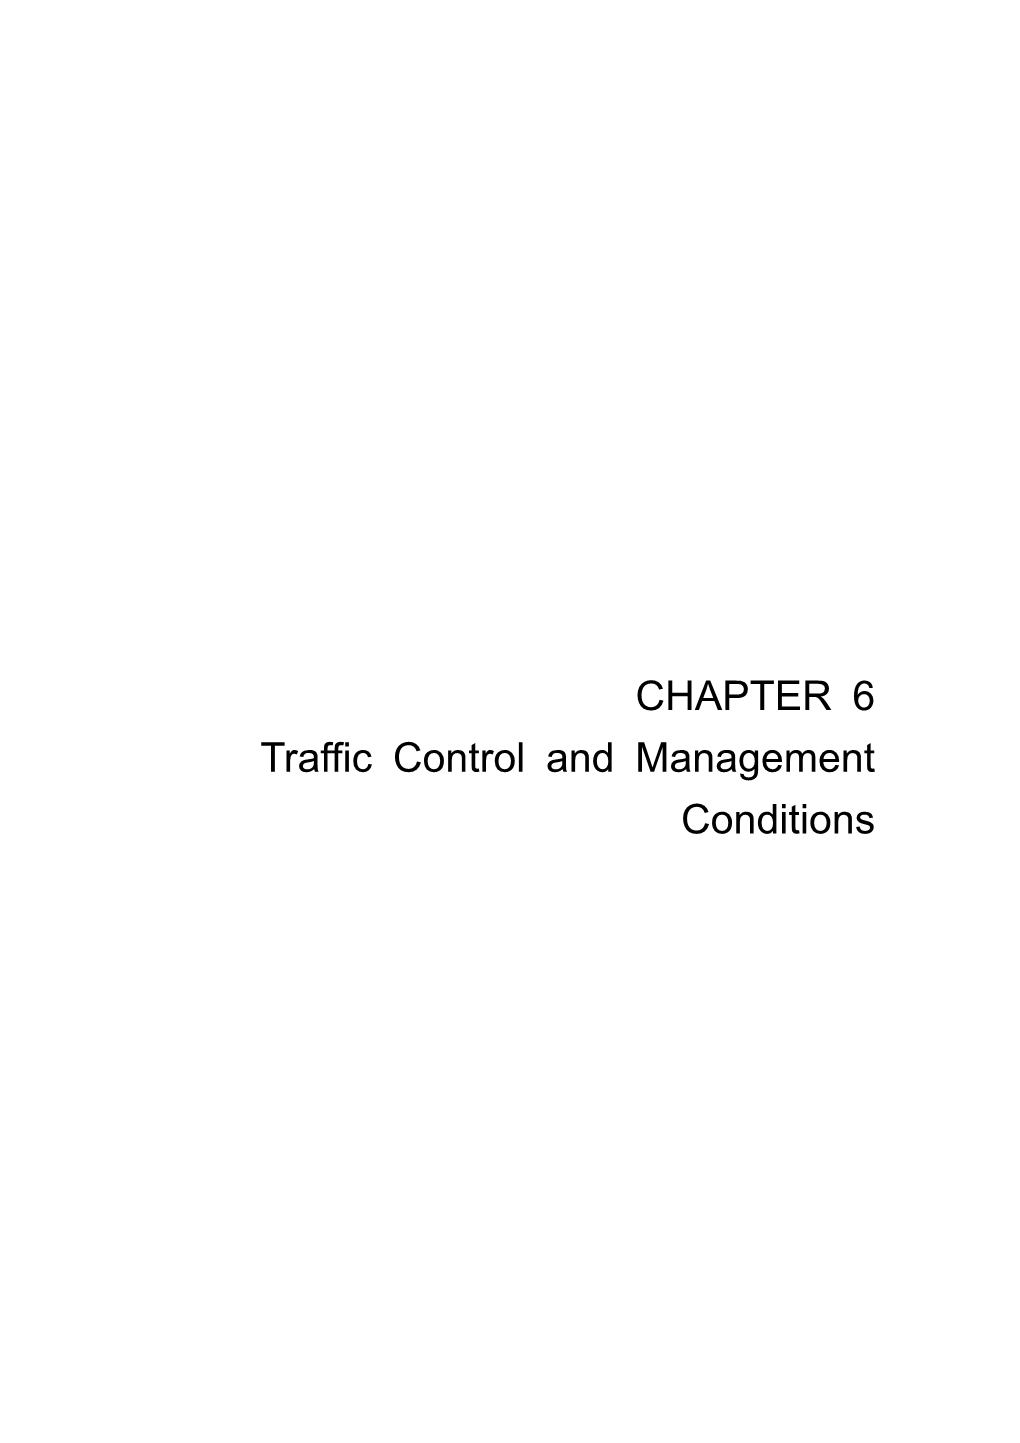 CHAPTER 6 Traffic Control and Management Conditions